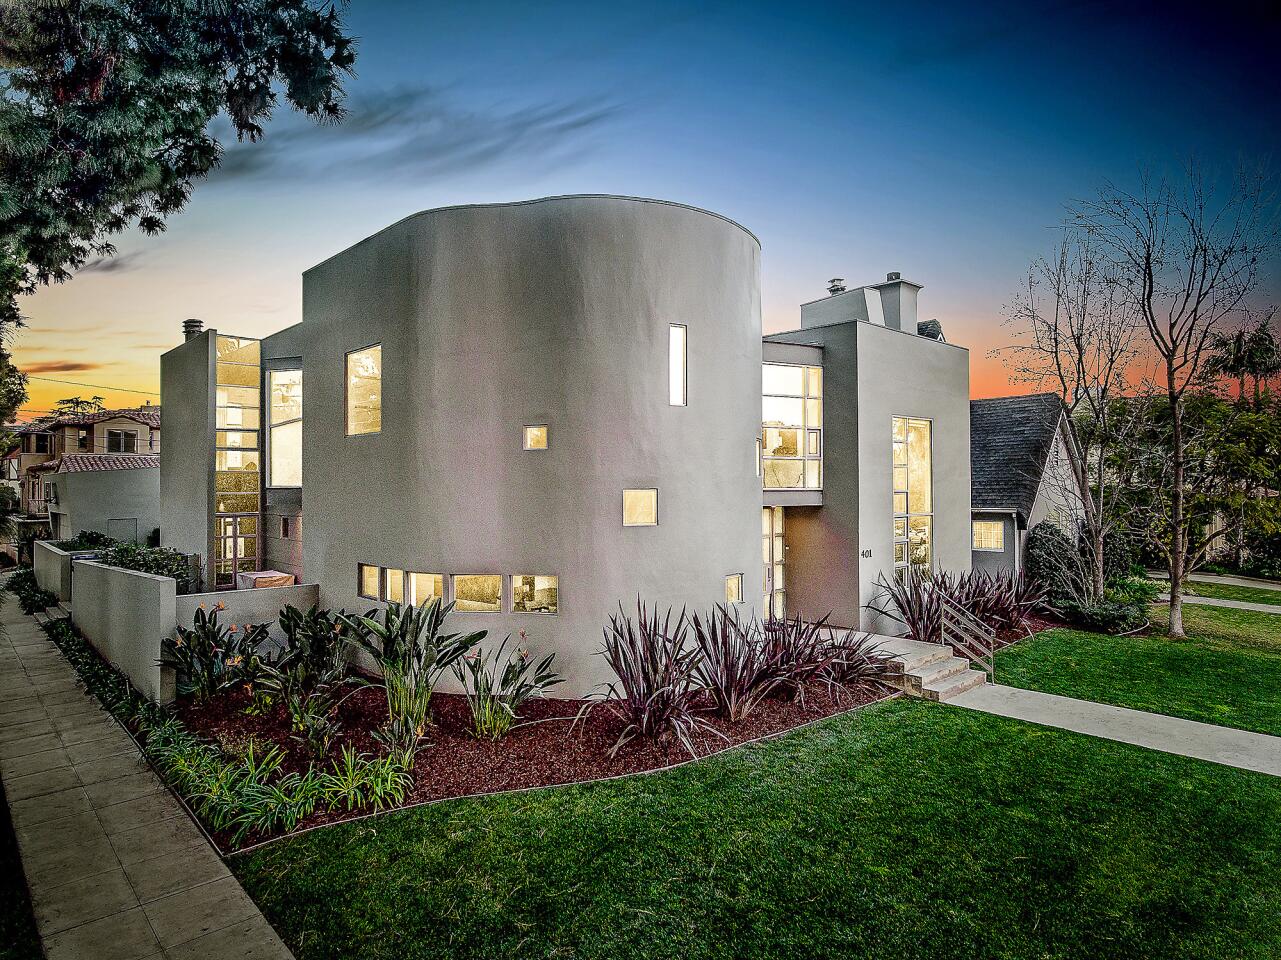 Home of the Week | Santa Monica modern is an ode to Le Corbusier